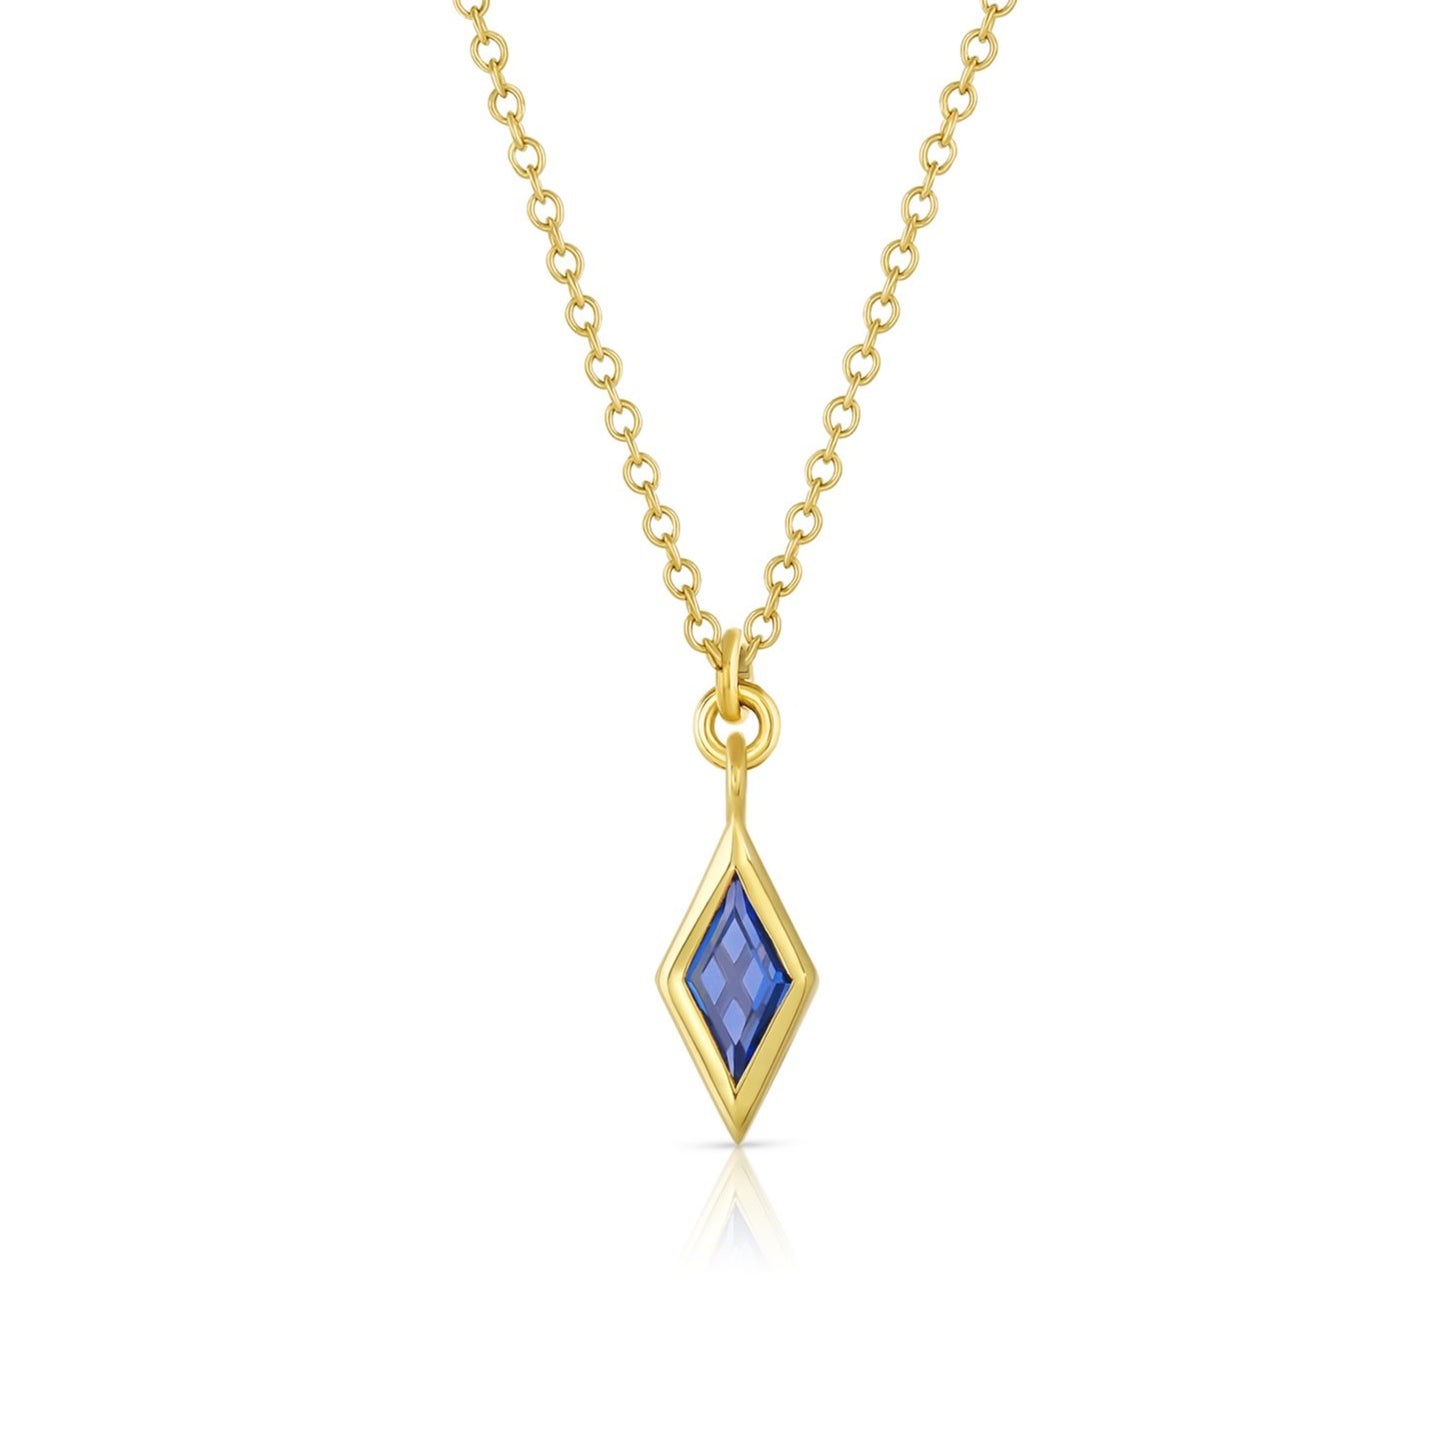 Load image into Gallery viewer, blue sapphire rhombus shaped pendant on chain in 18k yellow gold.
